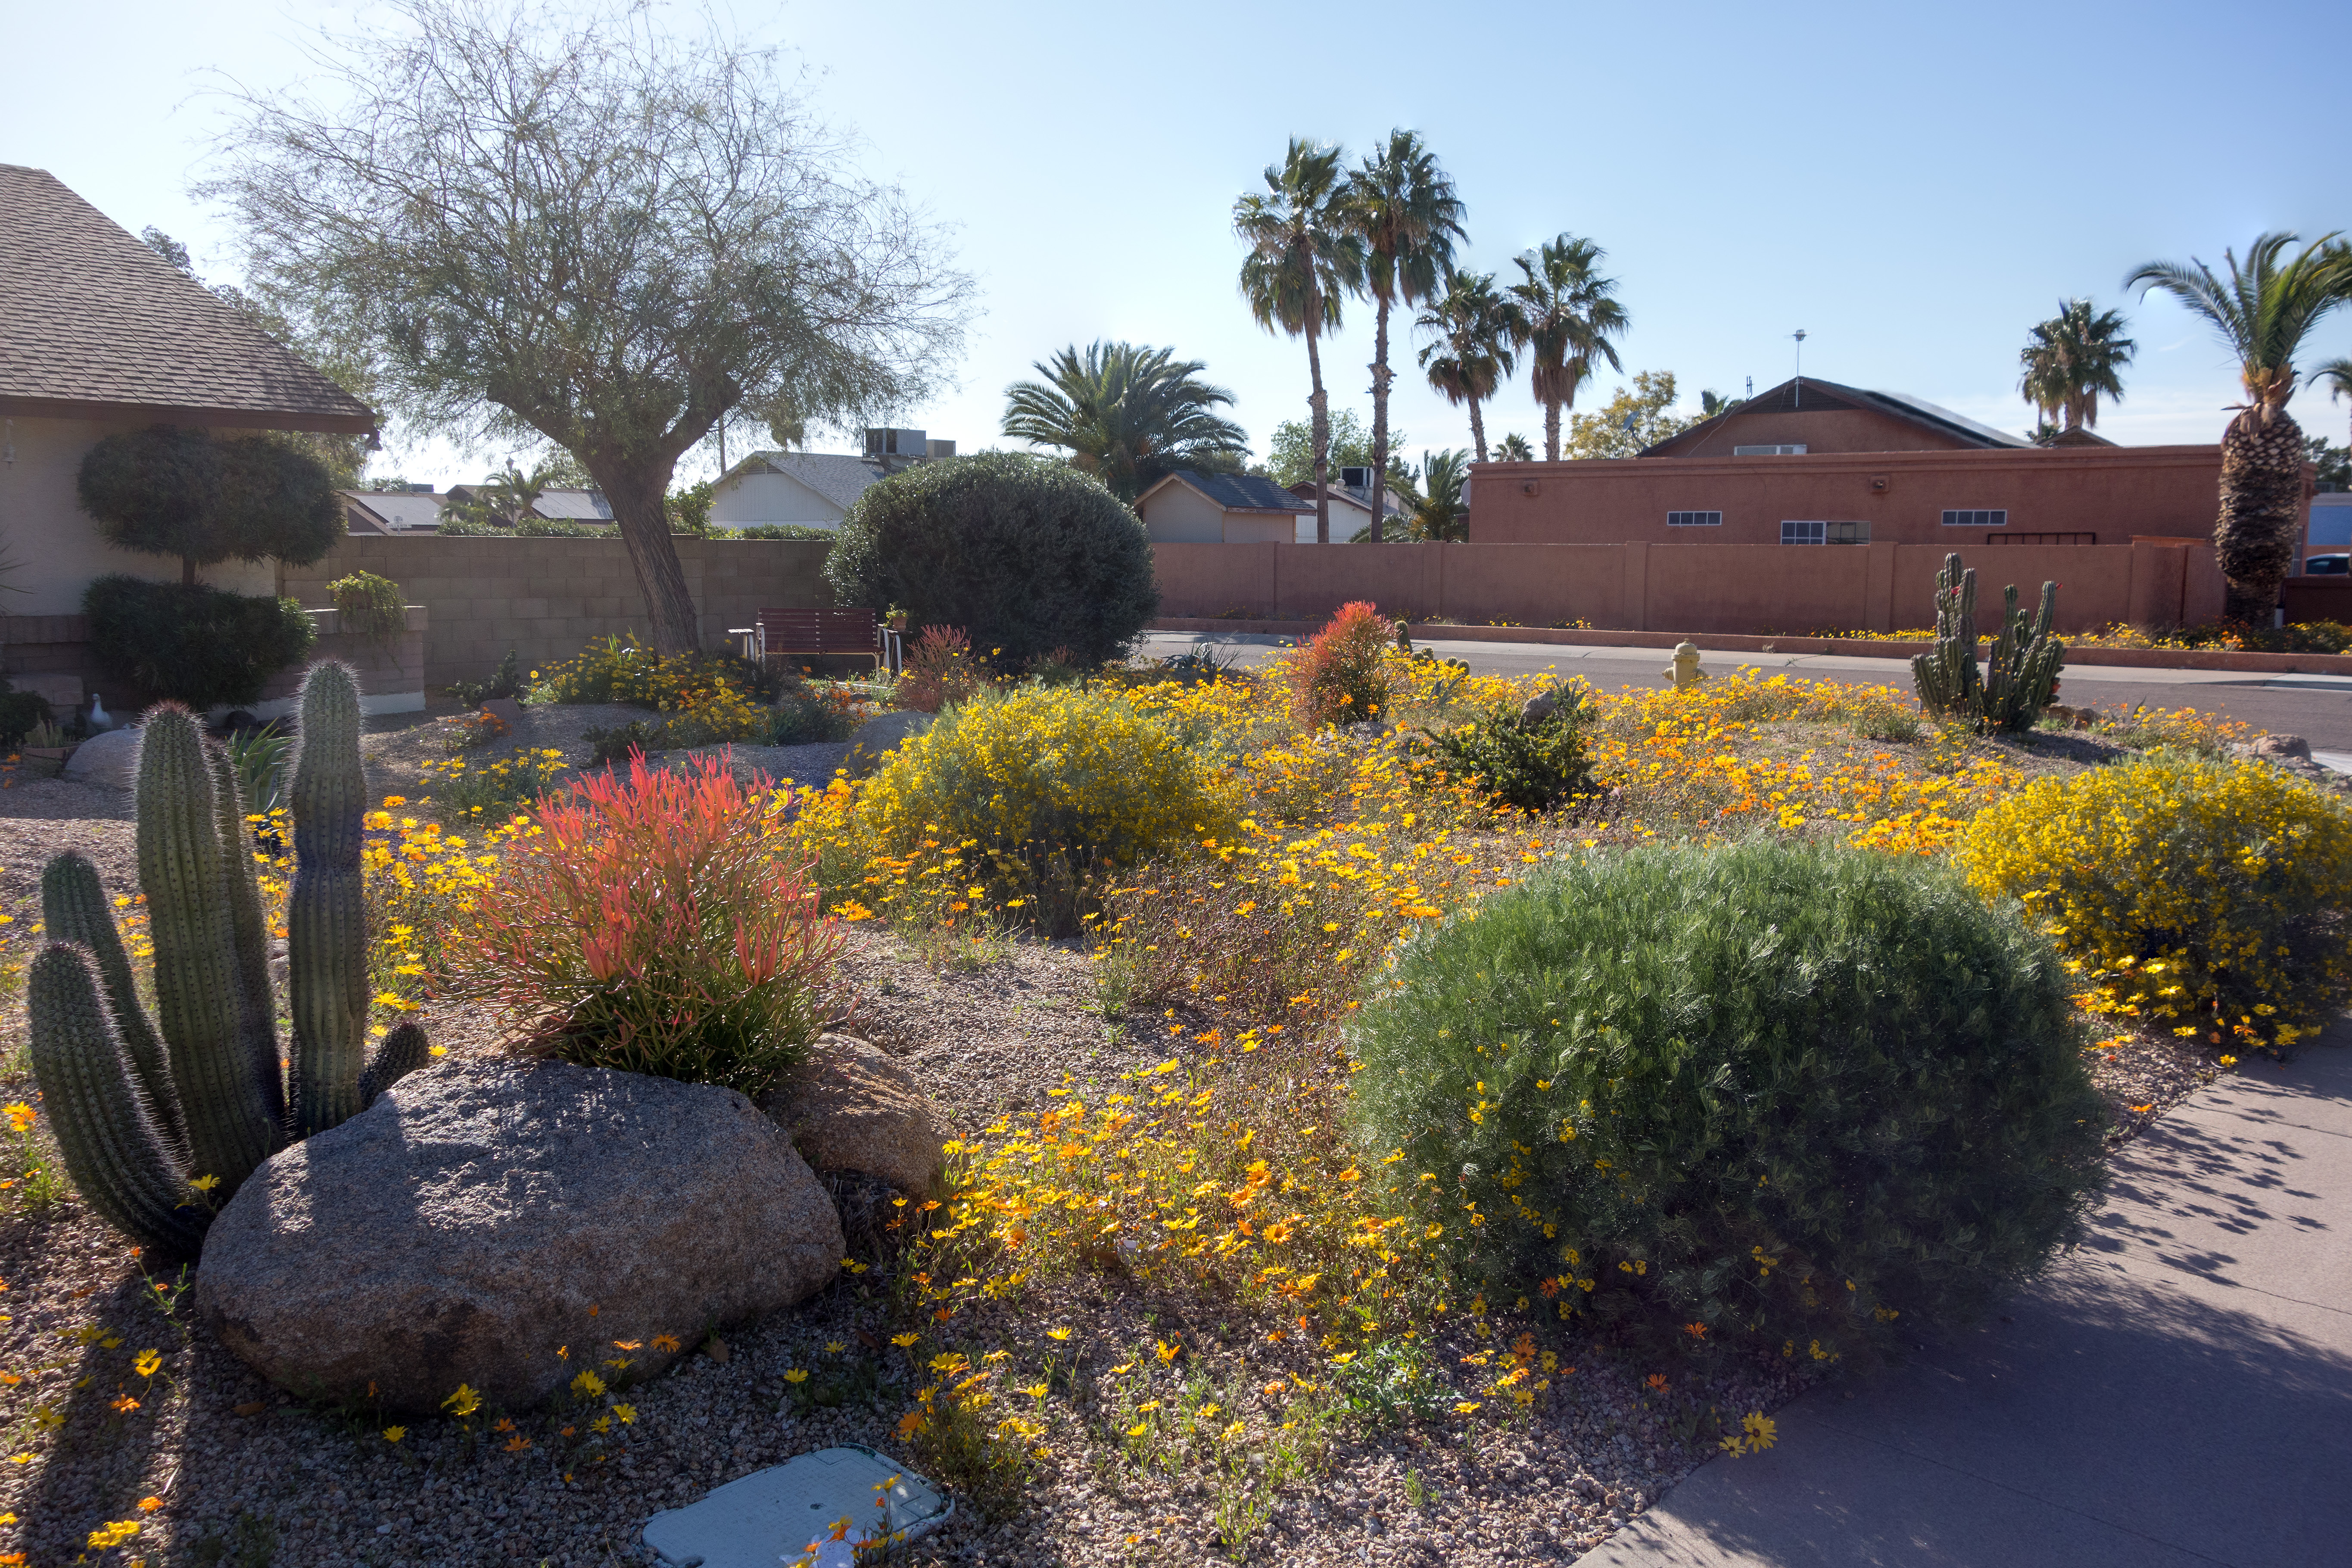 Arizona city landscape with waves of green, yellow and red colors created by drought tolerant plants in xeriscaped road sides; back lit shot